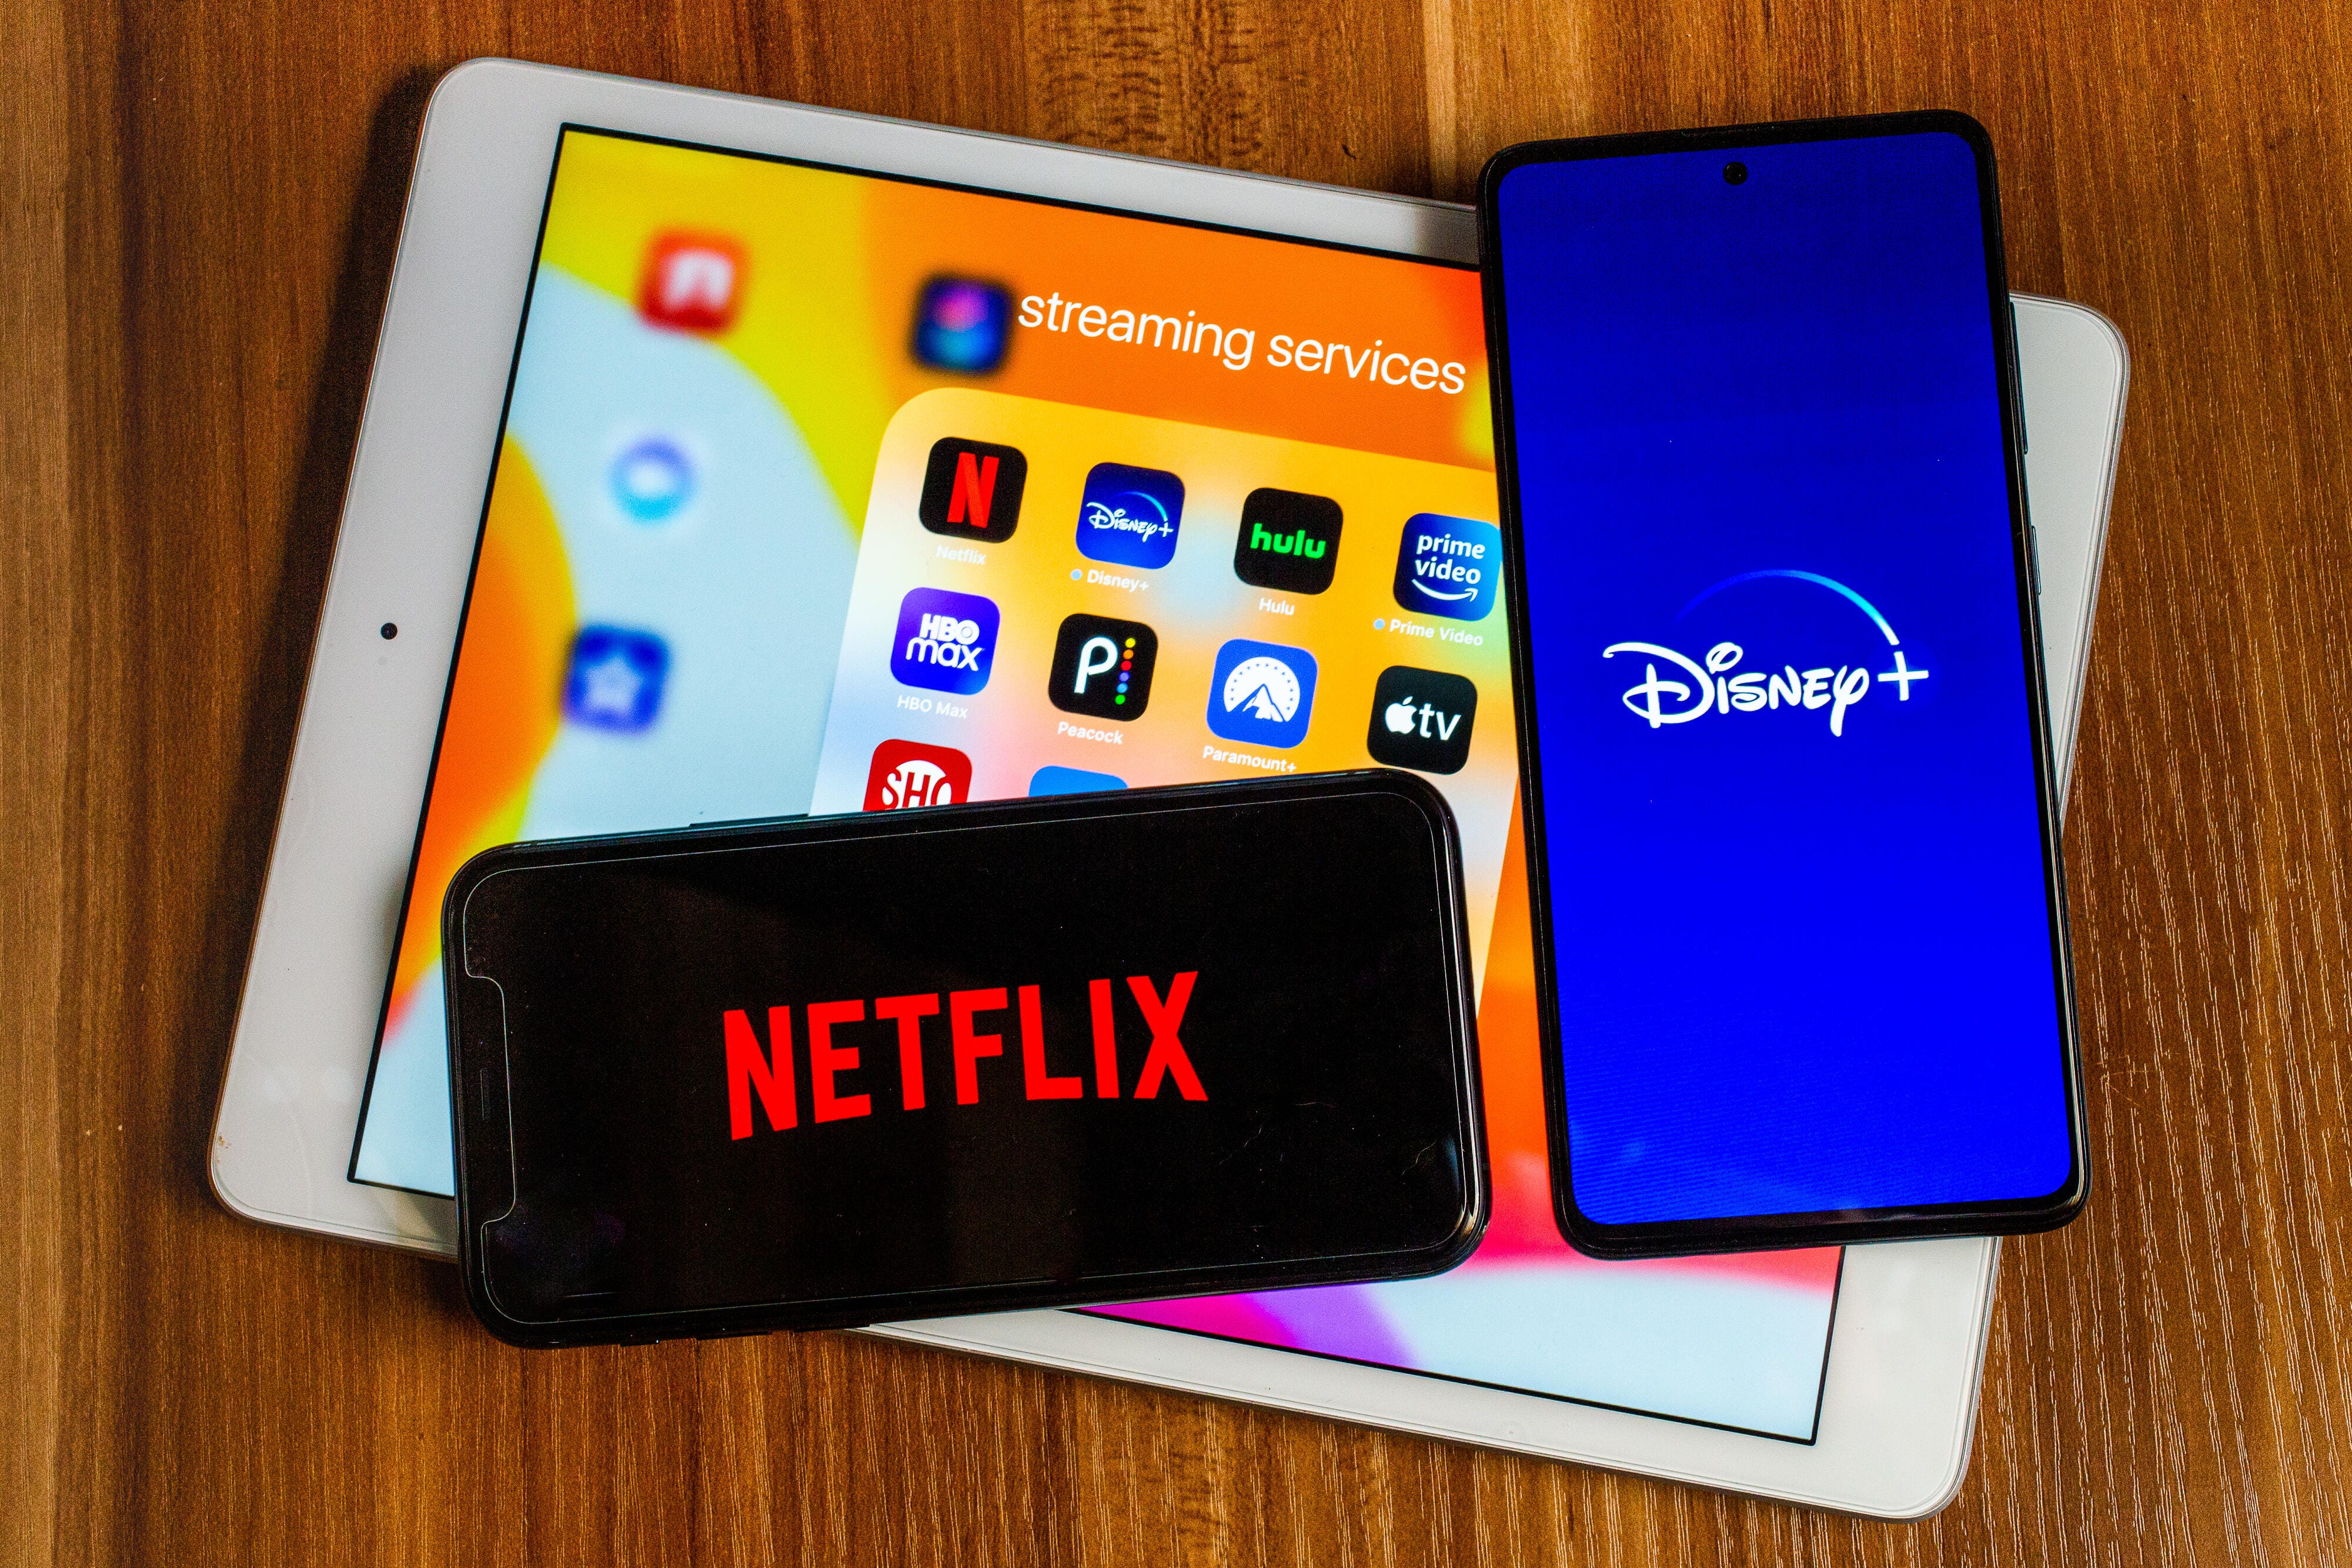 Cash back credit cards for Netflix lovers (and Disney Plus, HBO Max and other streaming services)